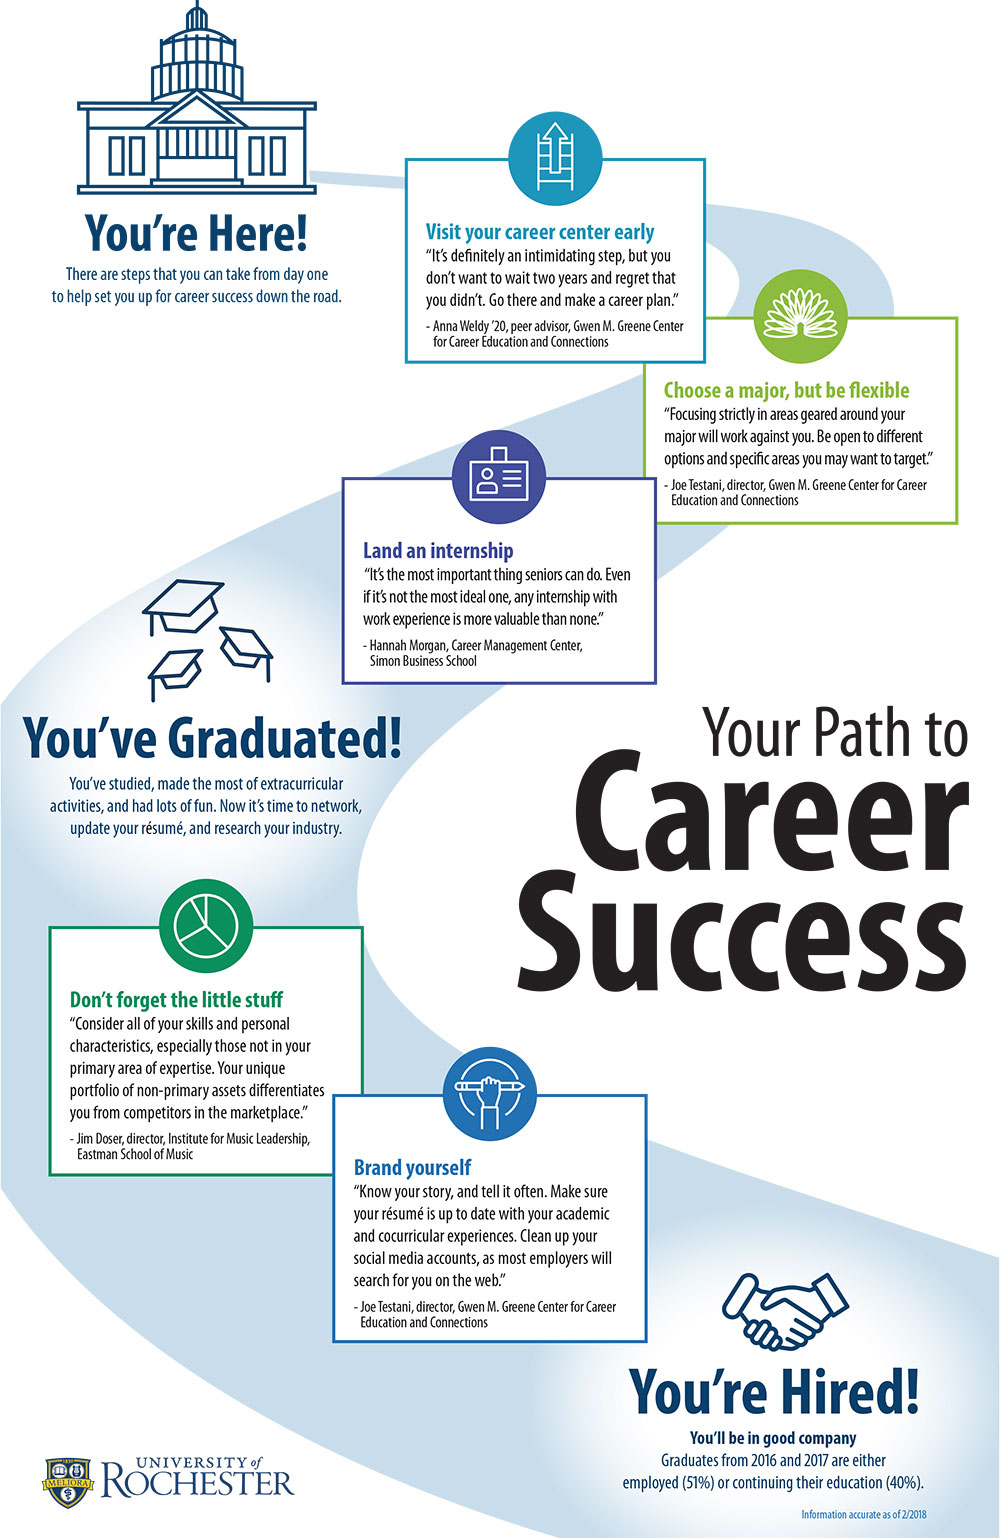 Changing approaches guide students’ path to career success News Center